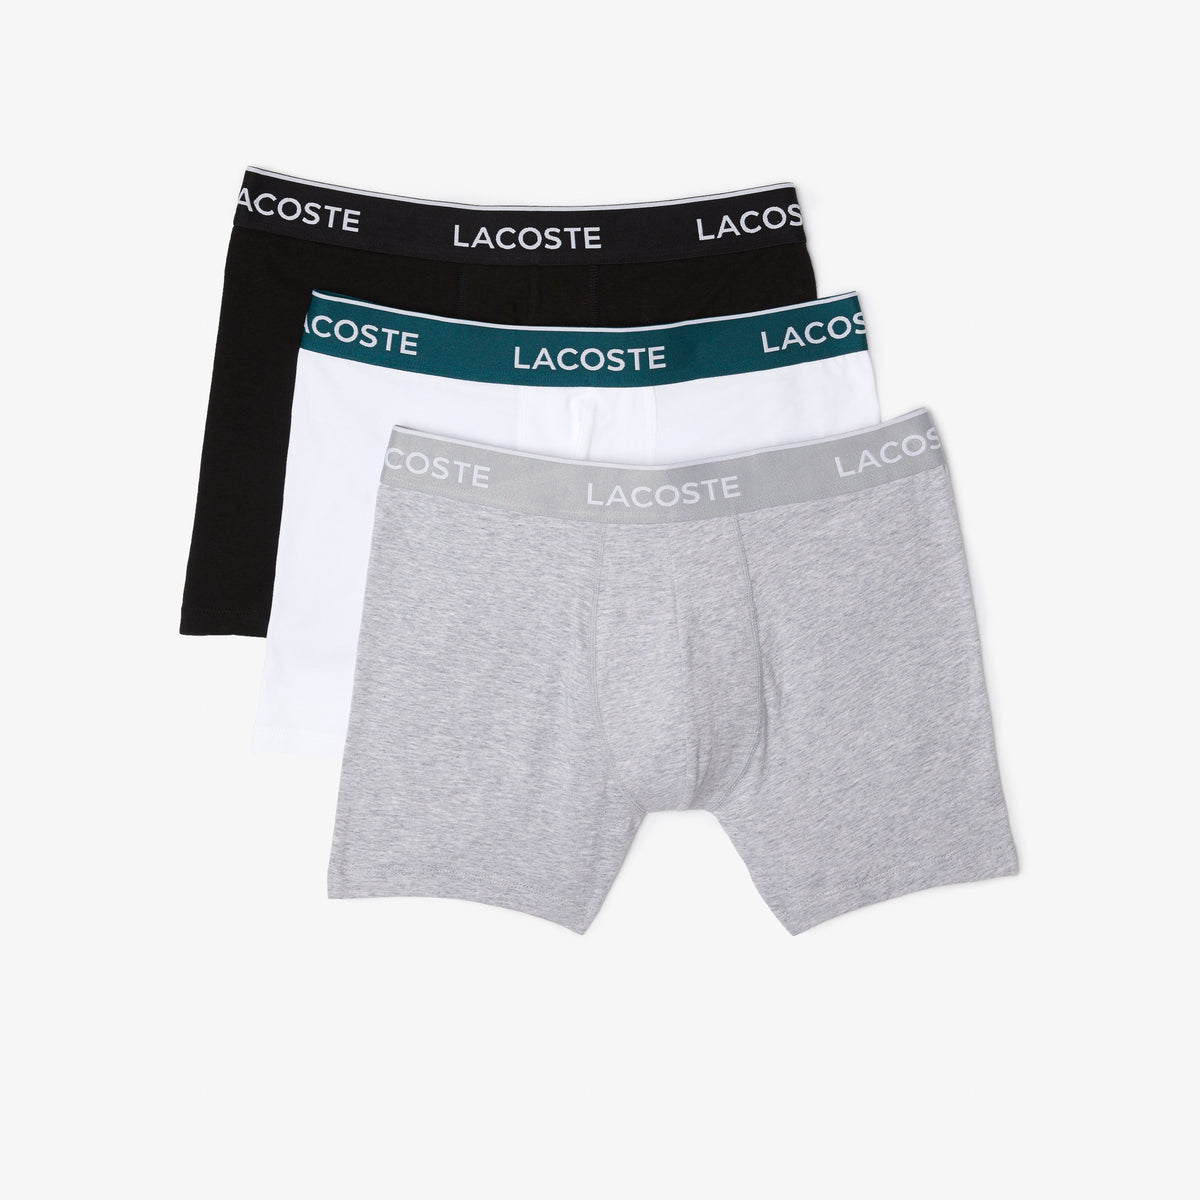 Men’s Lettered Waist Long Stretch Cotton Boxer Brief 3-Pack - Black/White/Grey Chine